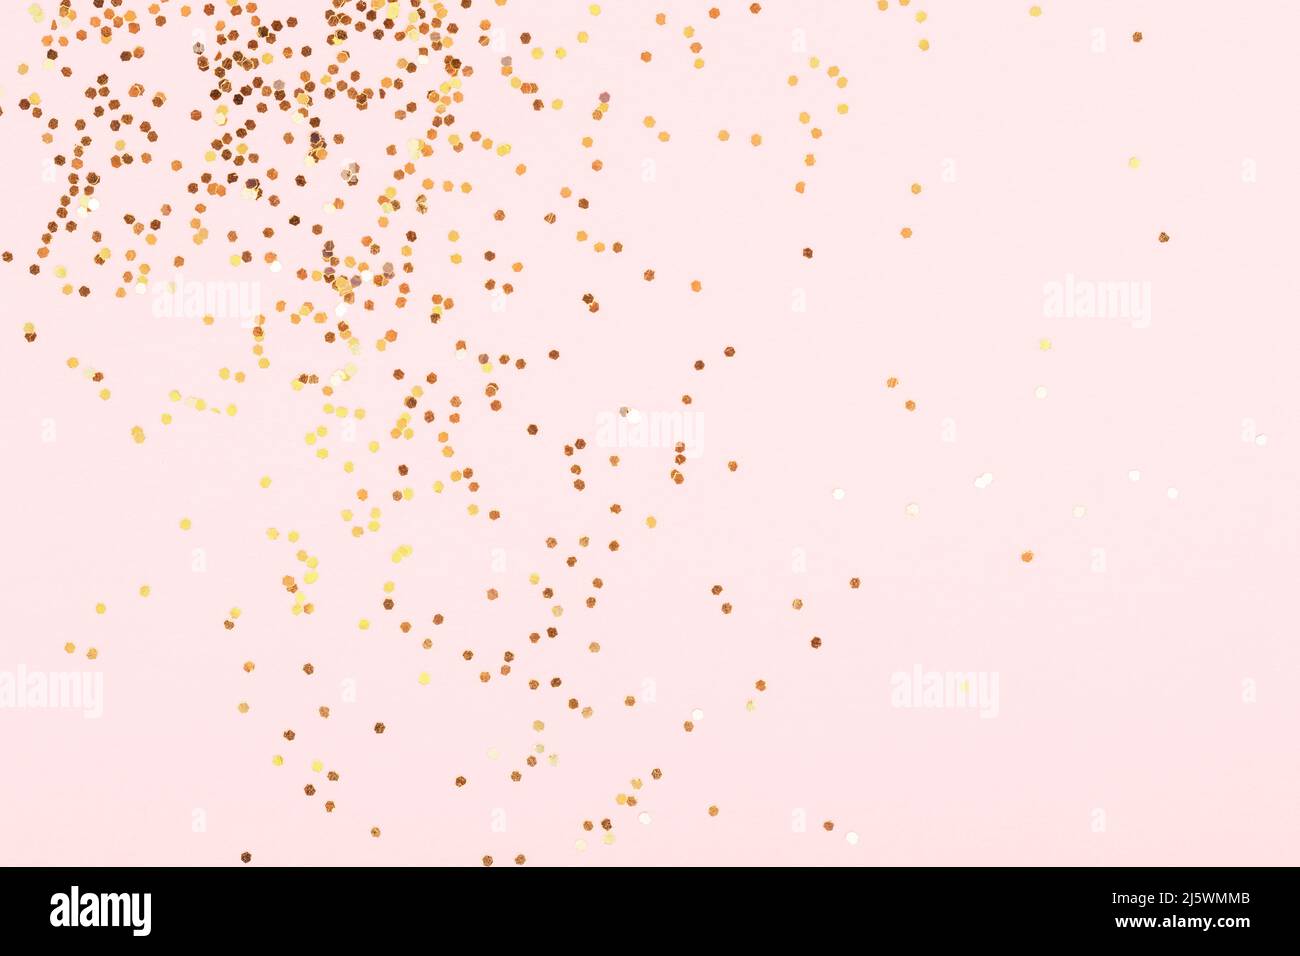 Scattering of golden confetti on pink background. Stock Photo